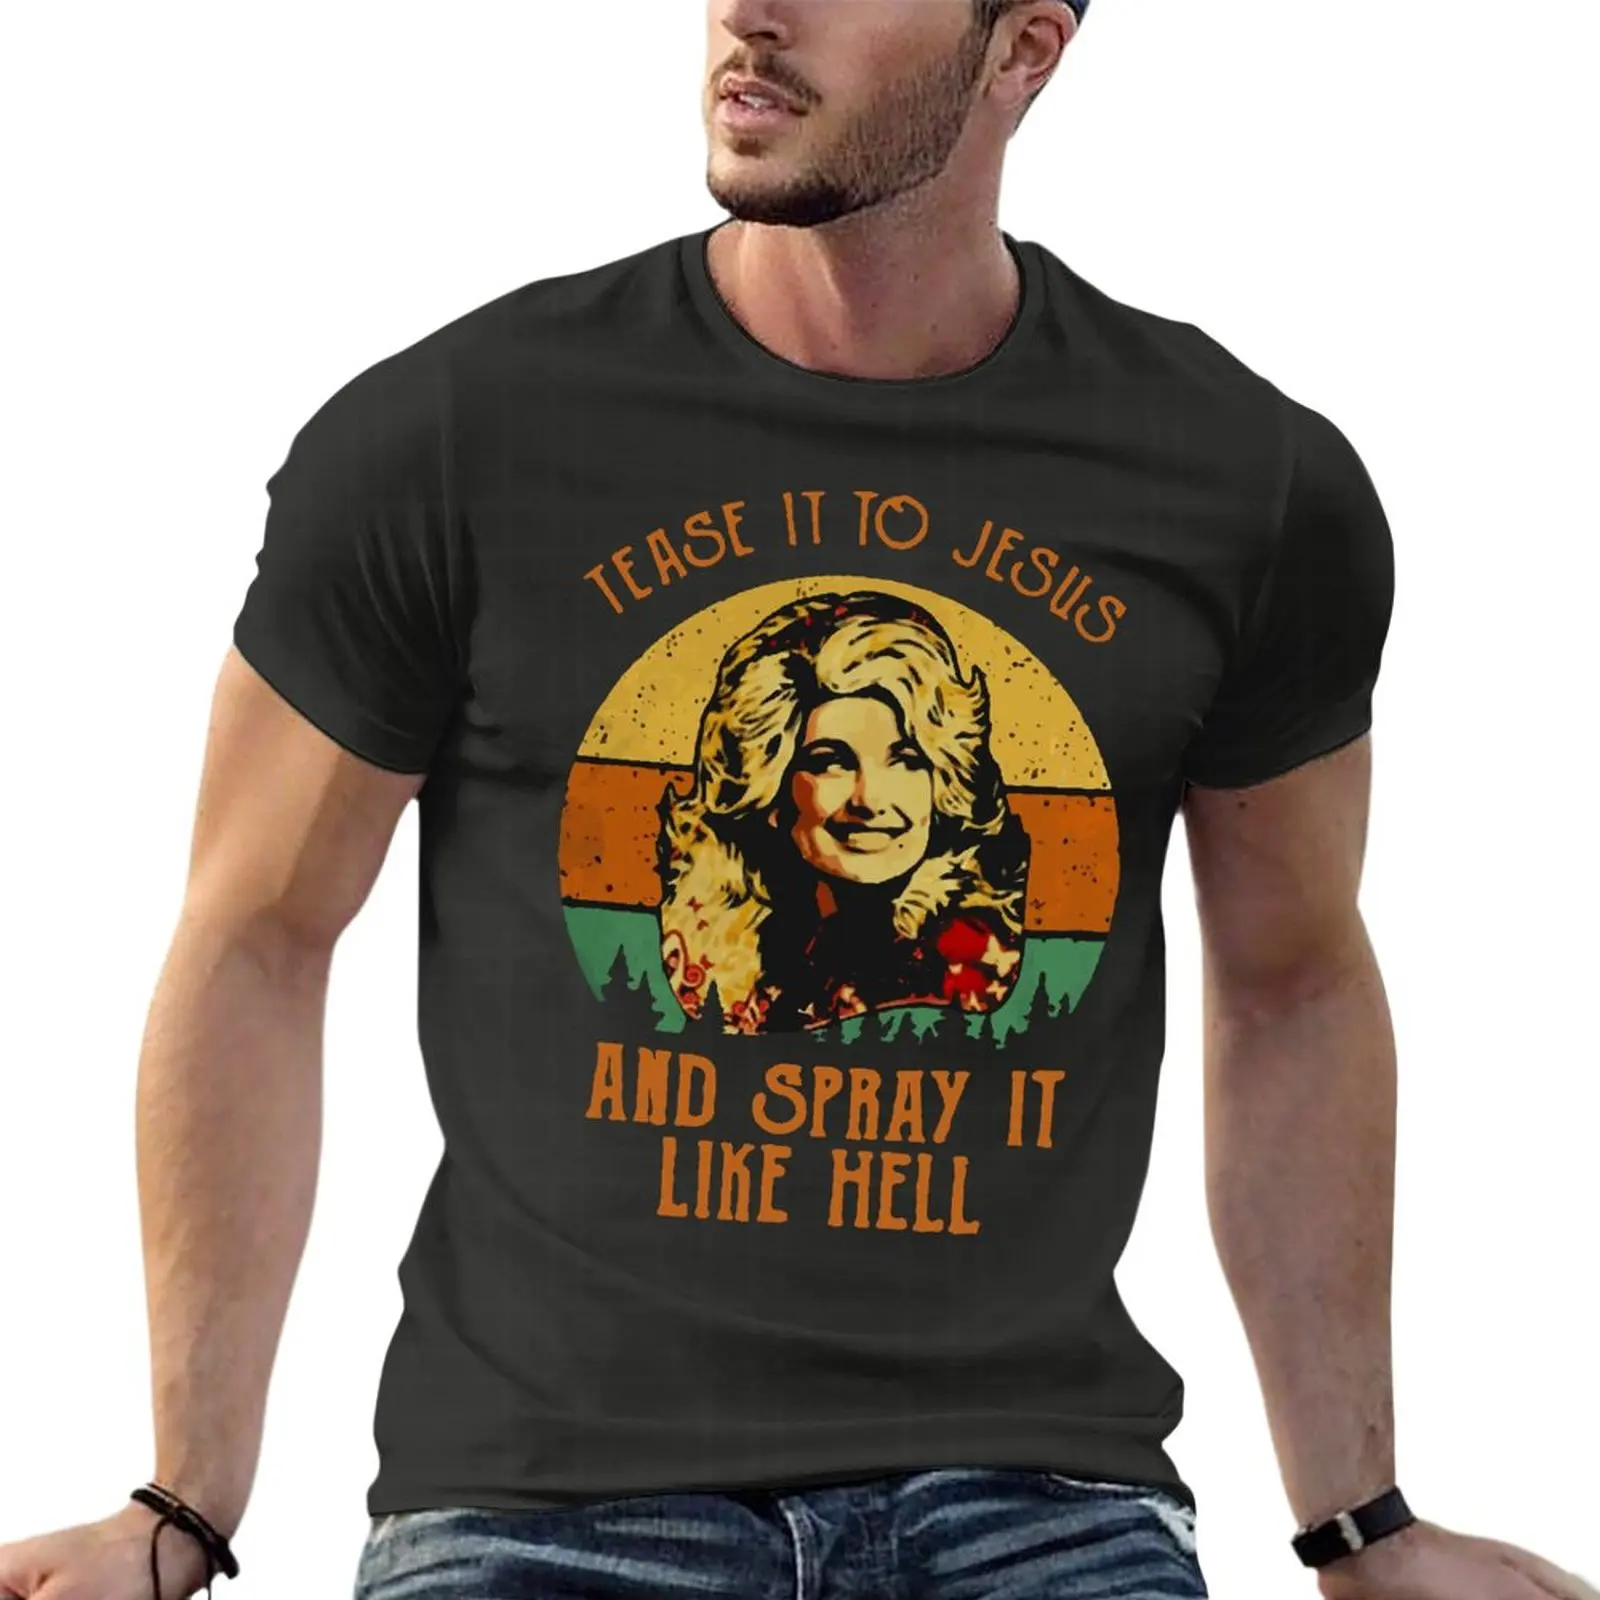 

Dolly Parton Tease It To Jesus And Spray It Like Hell Oversize T-Shirt Personalized Men Clothing Short Sleeve Tops Tee